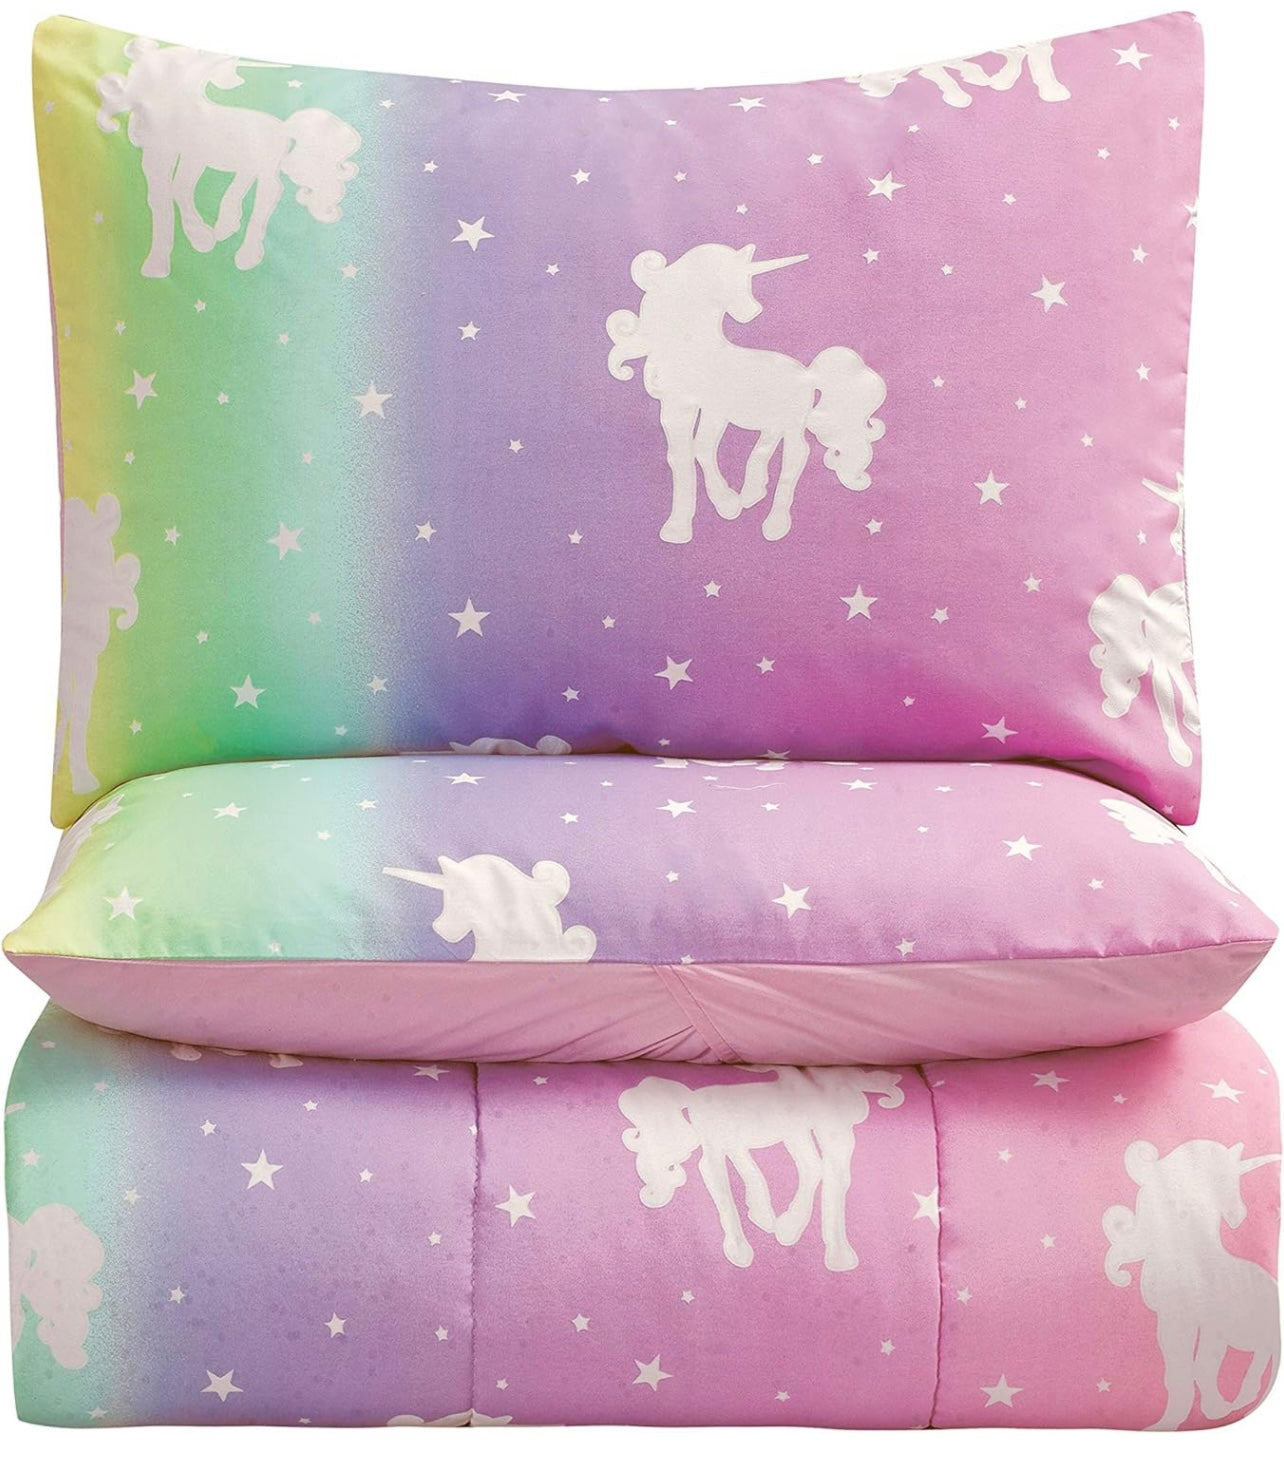 Kids Rule 7-Piece Unicorn and Stars Glow in The Dark Comforter Set, with a Comforter, Fitted Sheet, Flat Sheet, and 4 Pillowcases, Rainbow Colors, Pink, Multicolored, for Kids, Full